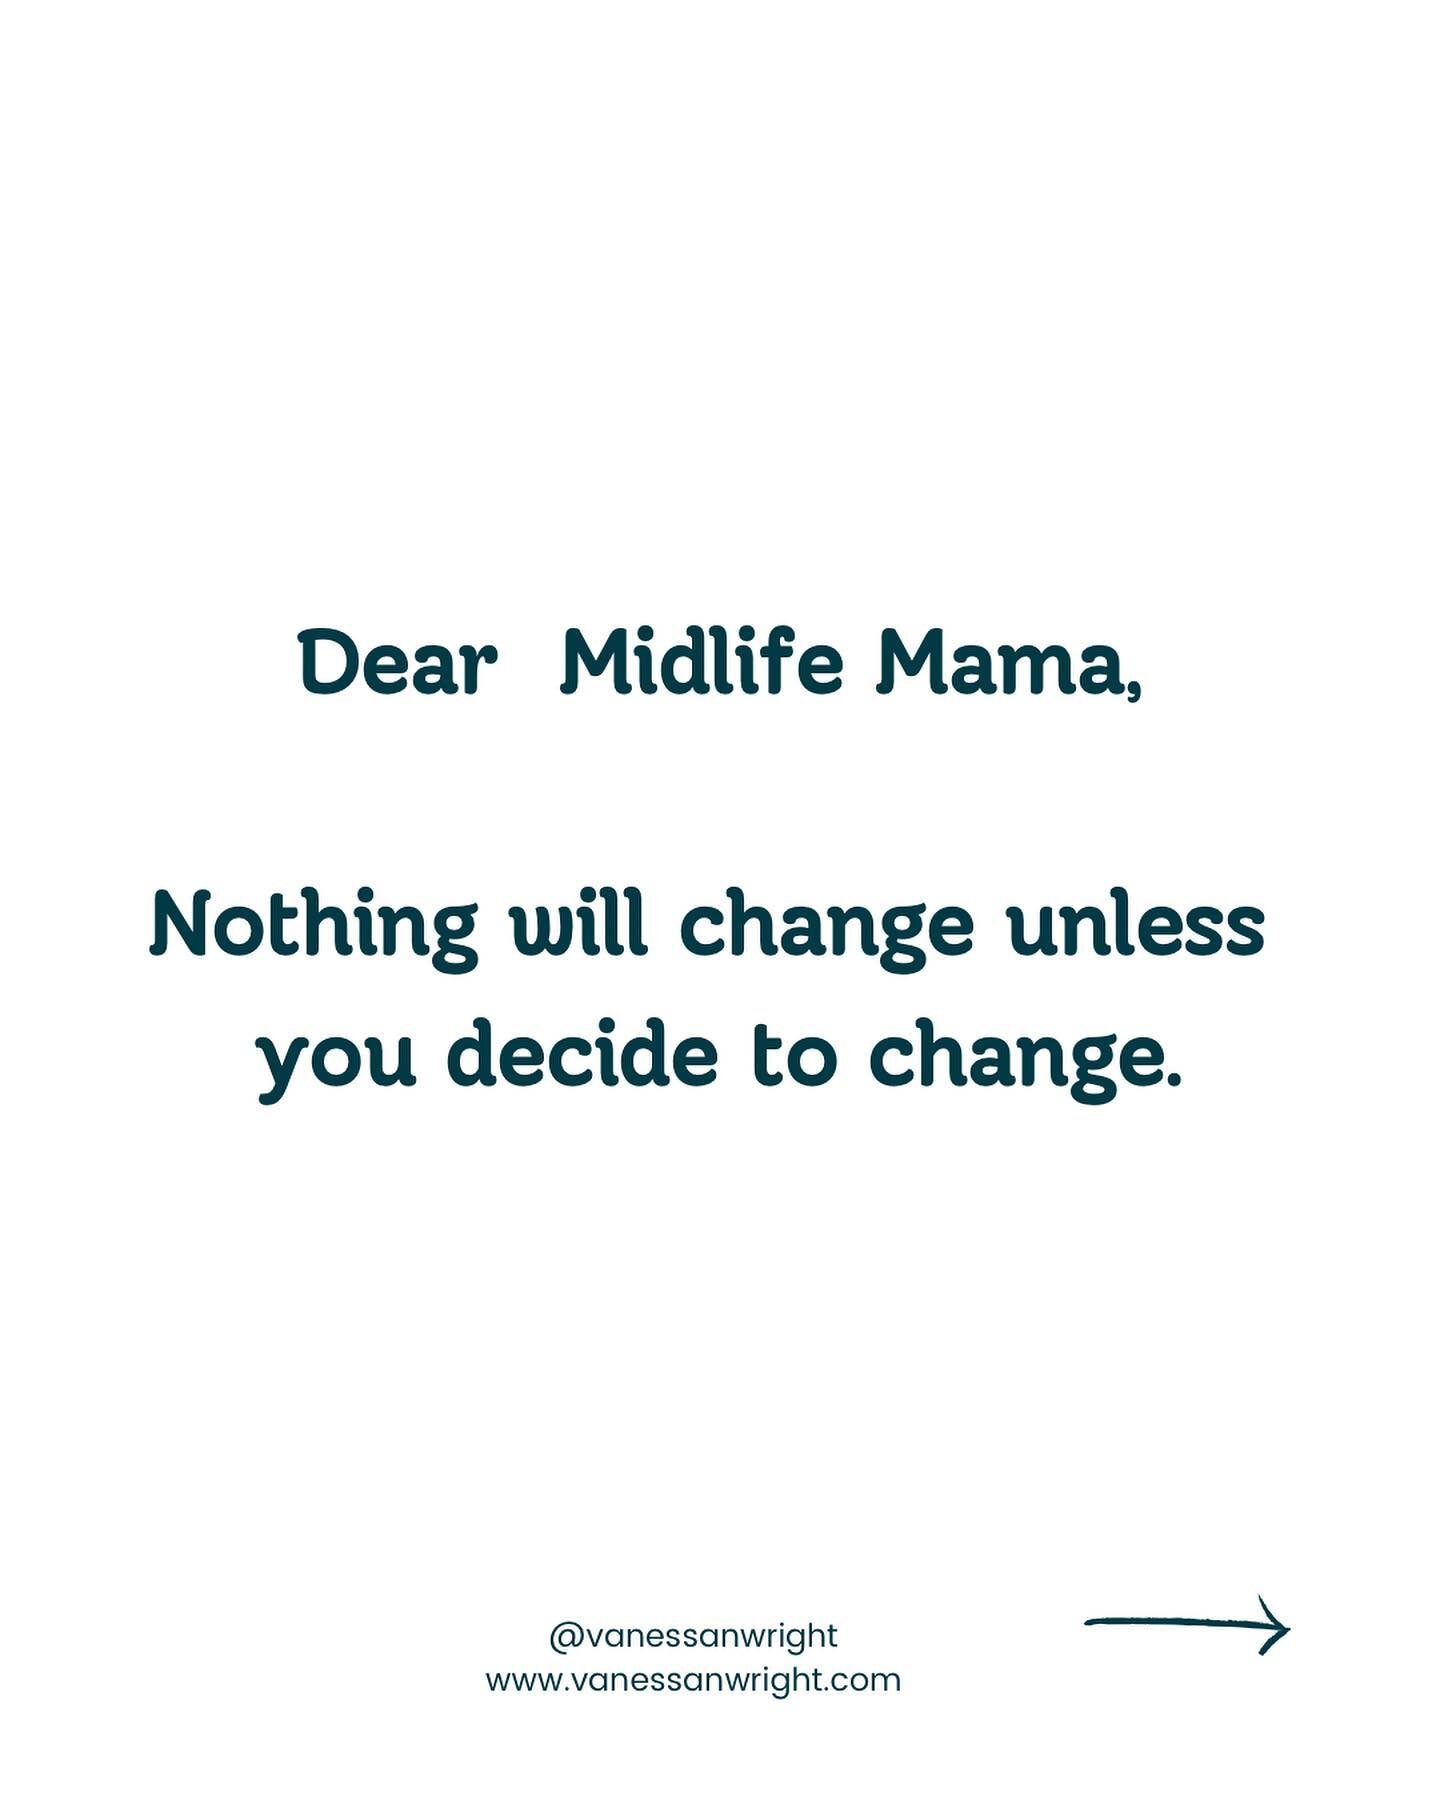 &hellip;&hellip;&hellip;&hellip;&hellip;

&ldquo;Nothing will unless you decide to change.&rdquo;

I wrote these words in my journal earlier this summer after a particularly rough few weeks.

Being a midlife mama, I often feel pulled in too many dire